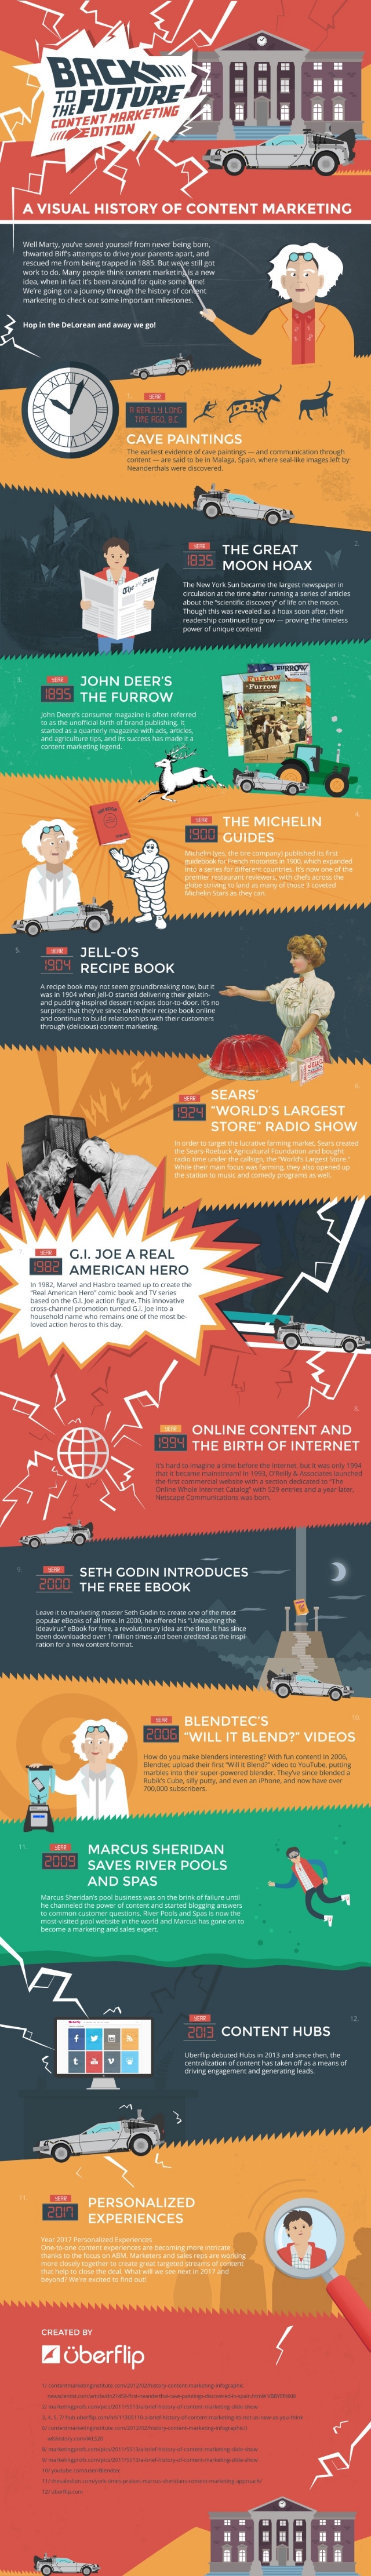 A Visual History of Content Marketing